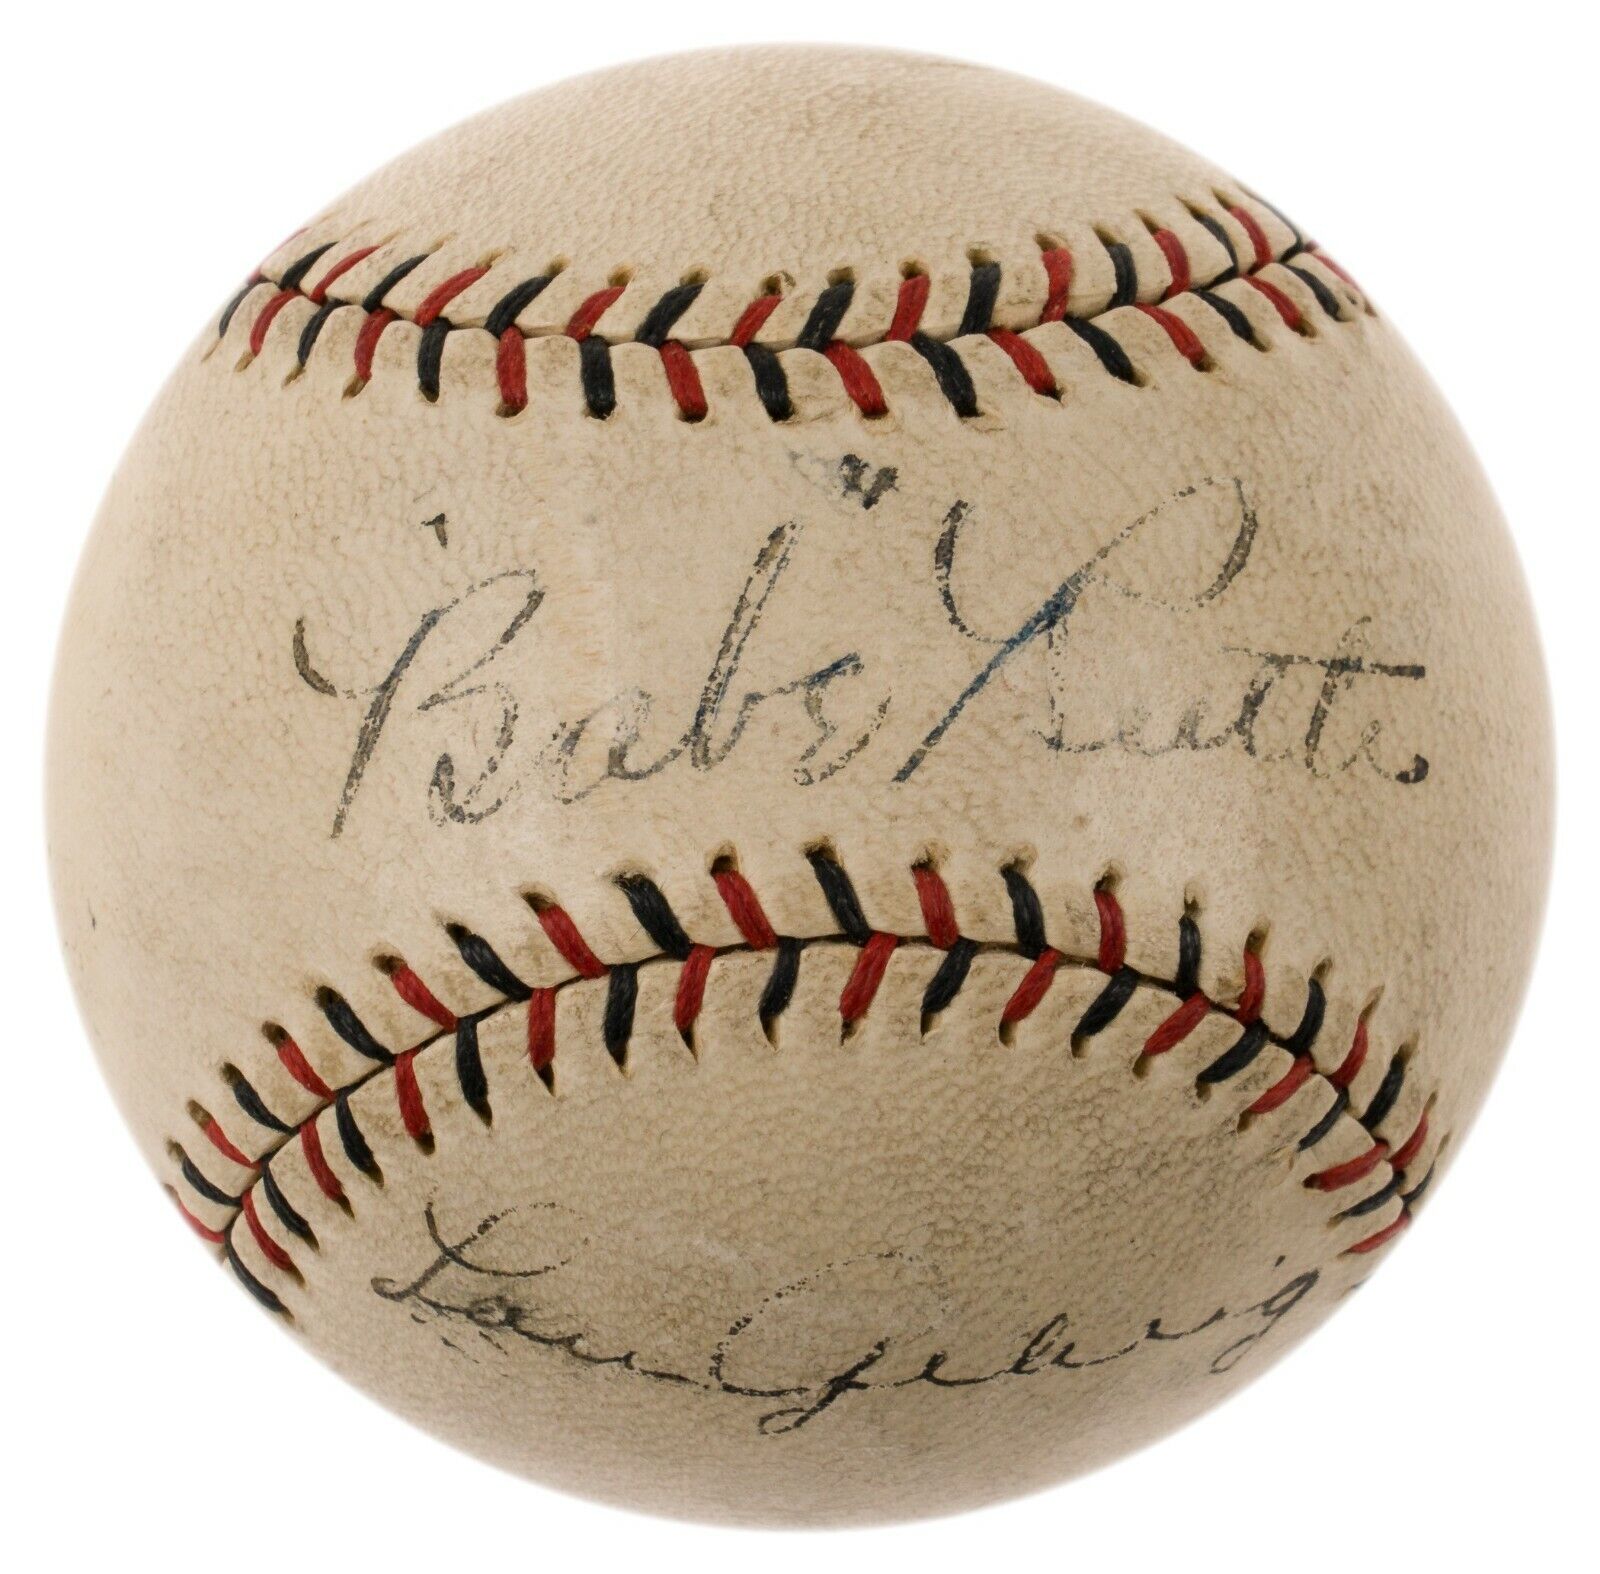 Magnificent Babe Ruth & Lou Gehrig Dual Signed 1927 National League Baseball JSA